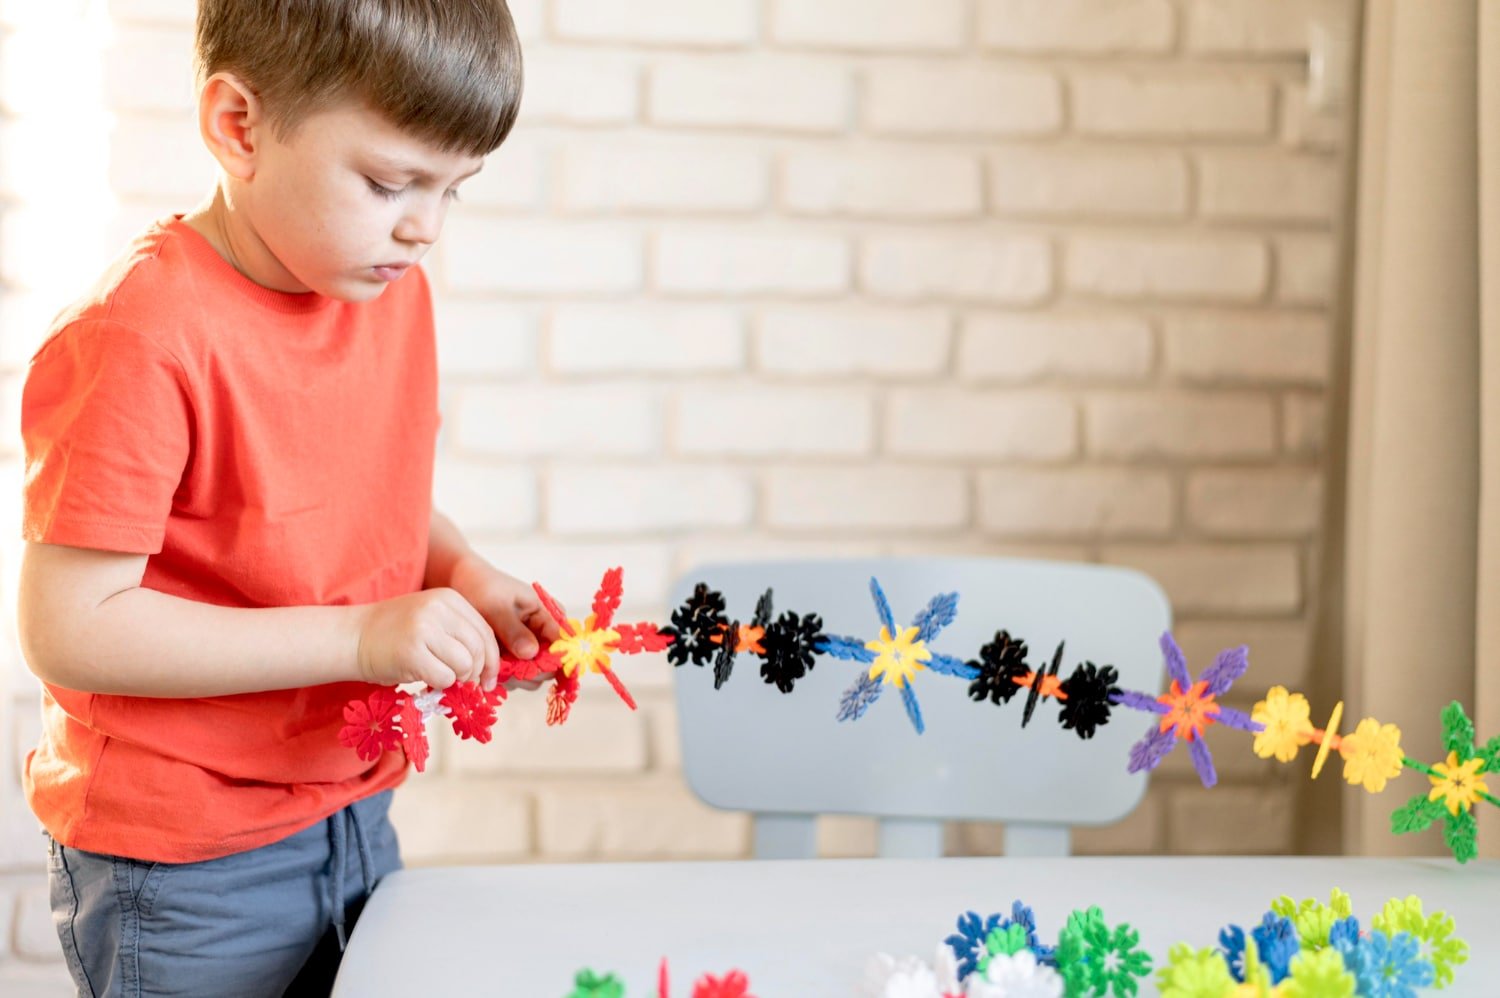 Spark Children’s Imagination With Mudpuppy’s Creative Educational Toys